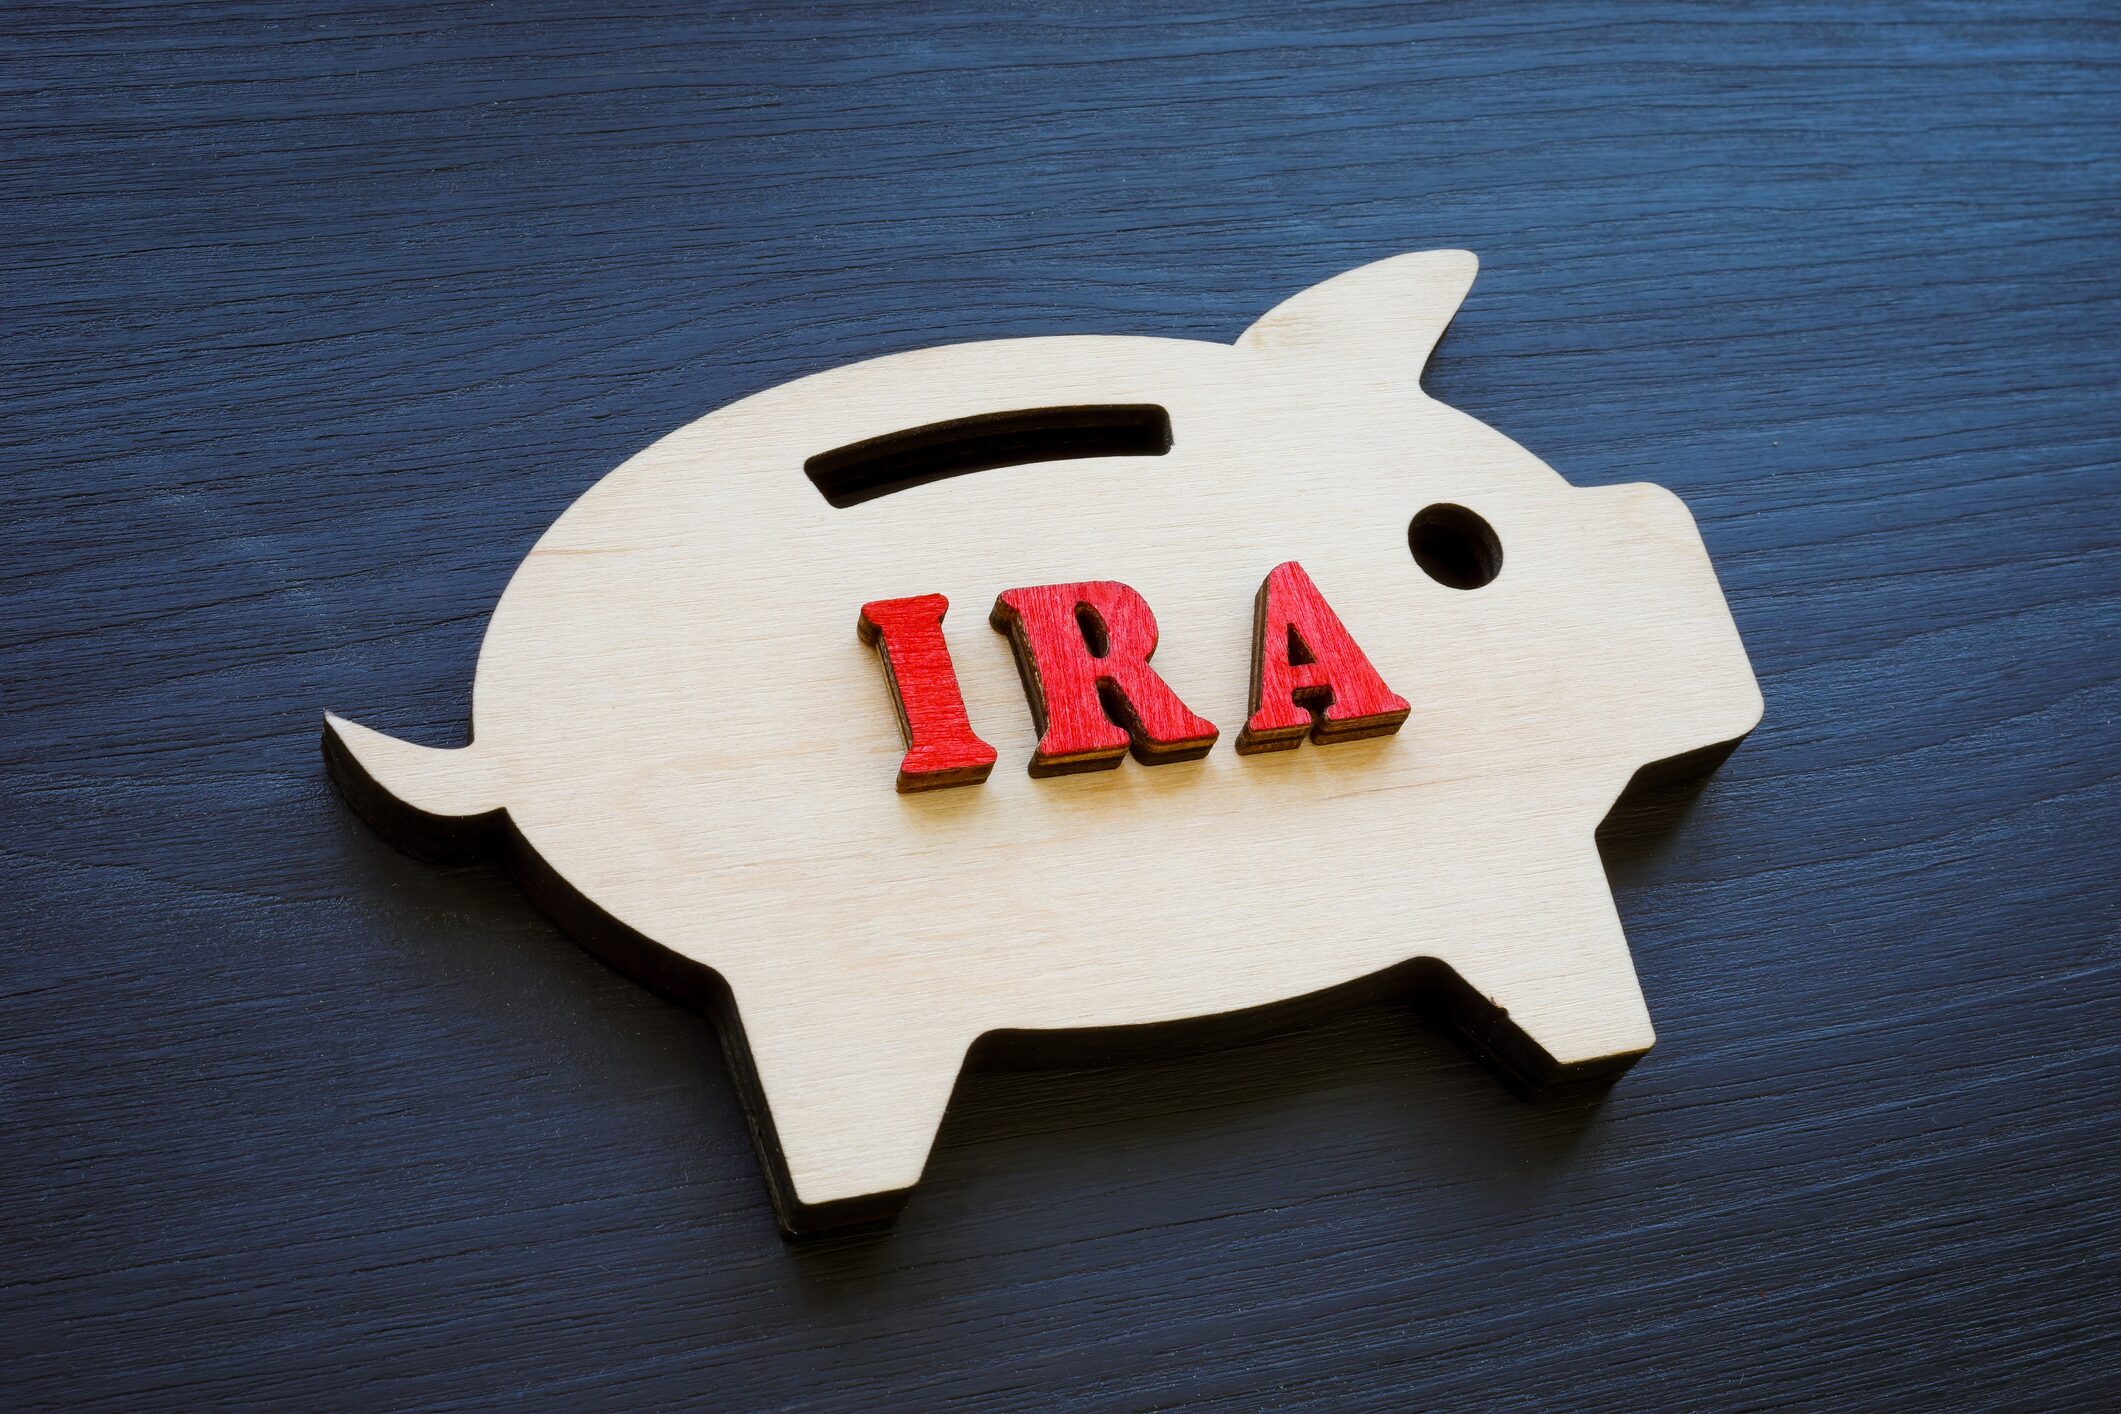 Speak with a financial advisor about transferring funds from your 401k account to an IRA. 